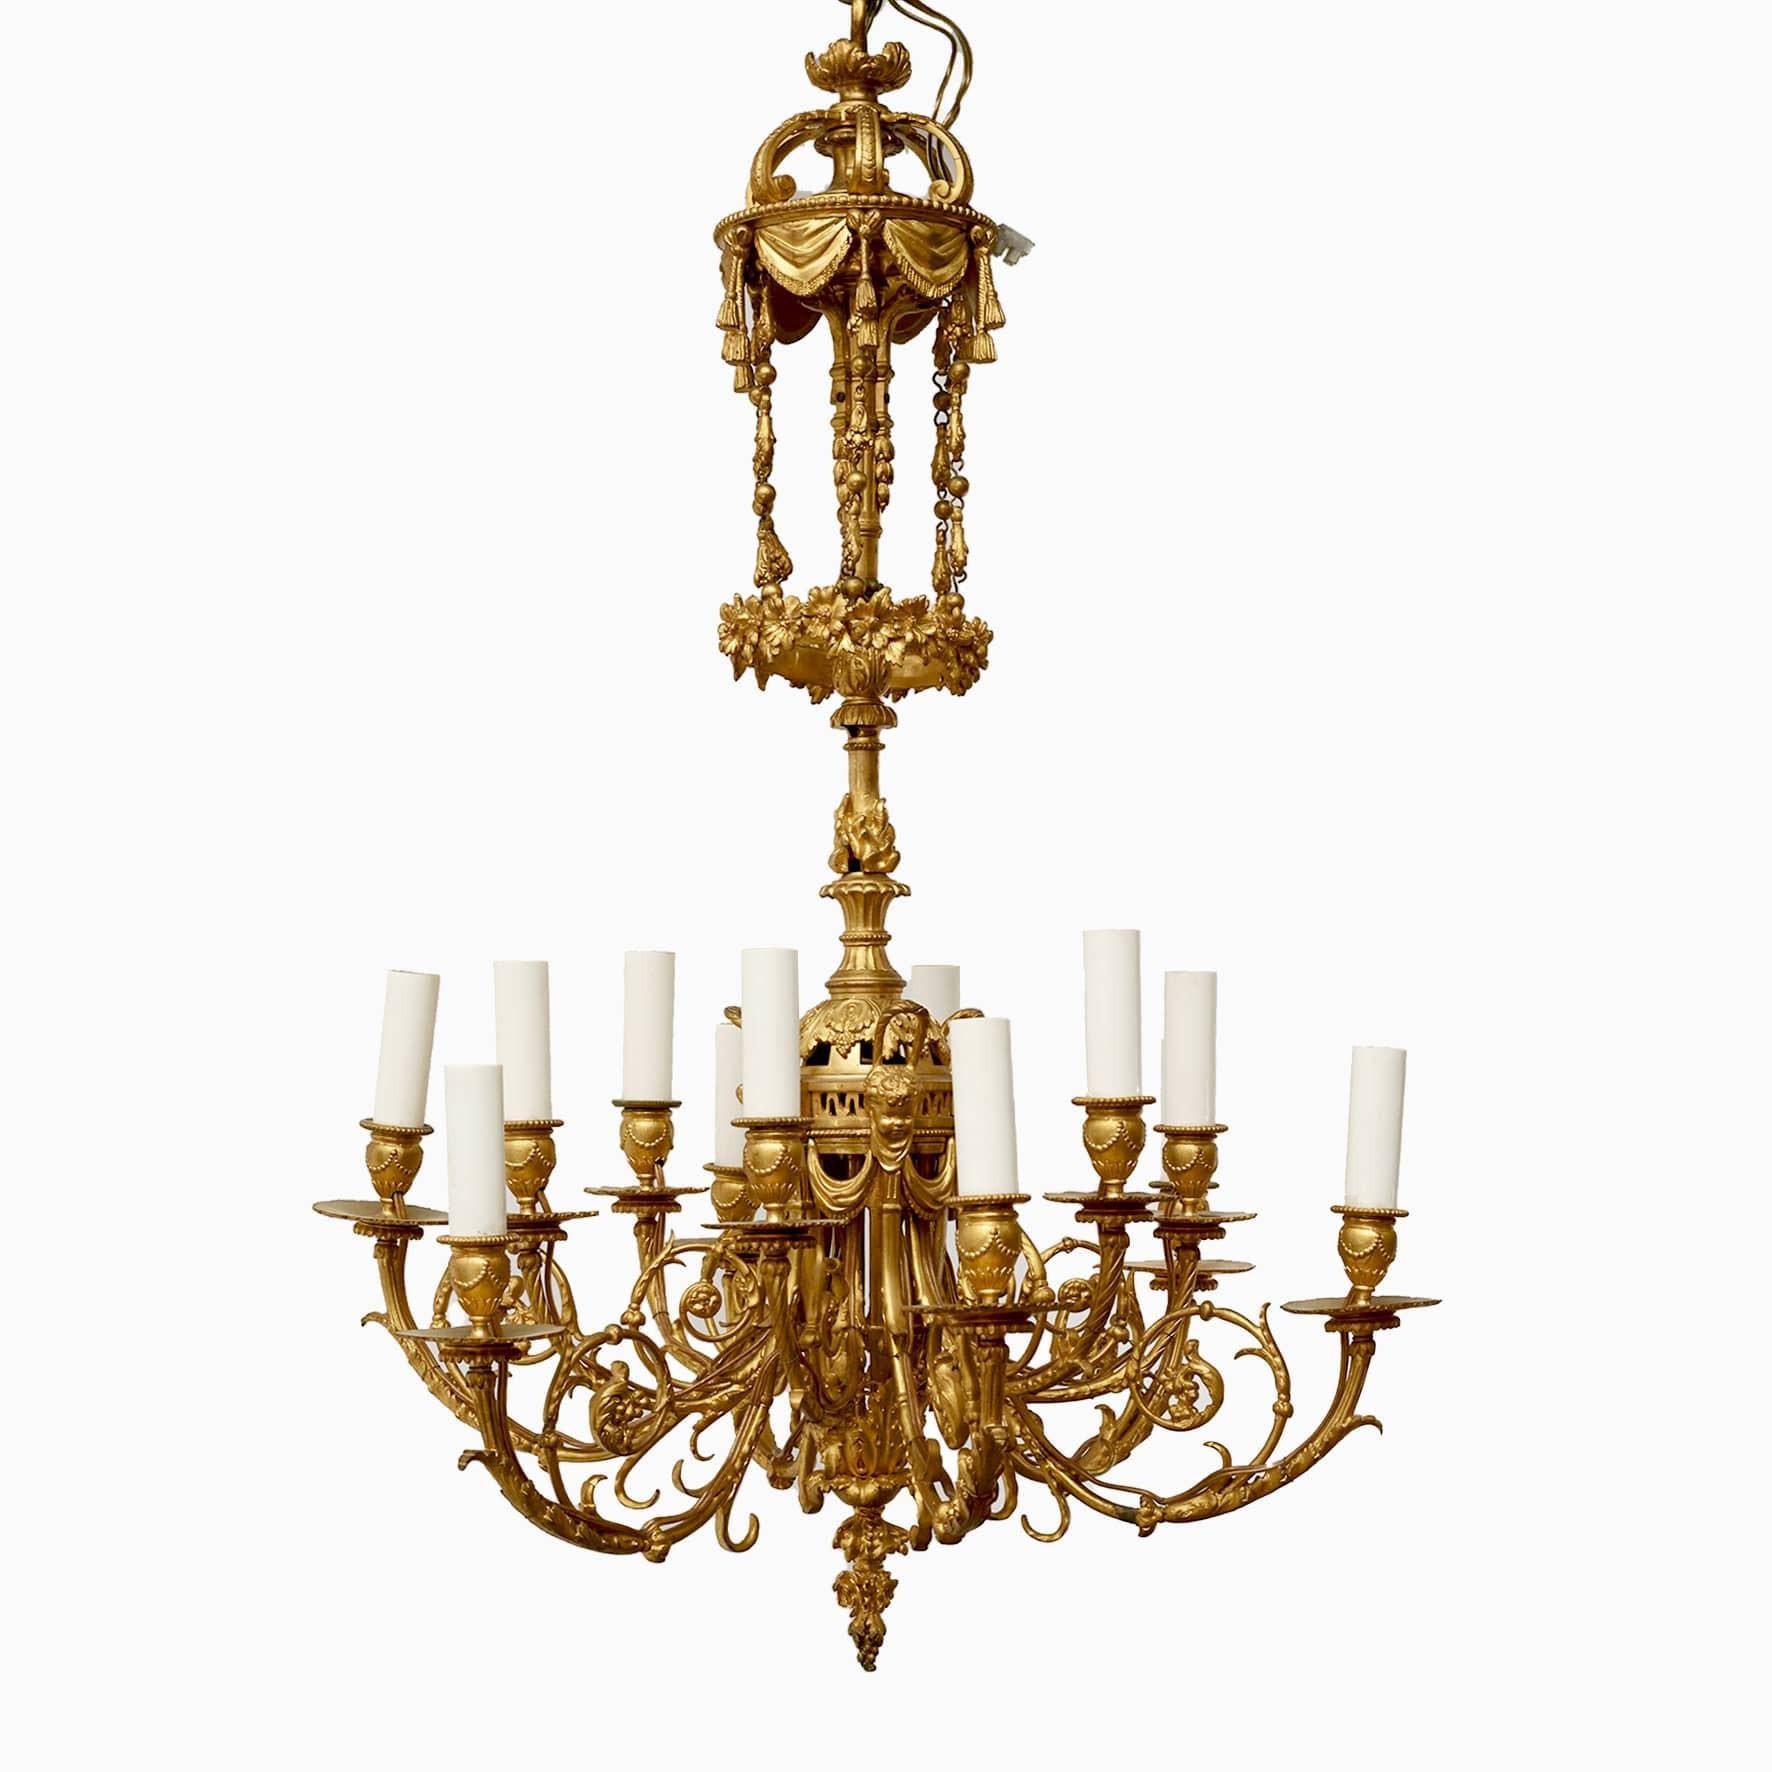 French chandelier in gilded bronze.
12 Candle pipes richly decorated. At the top with canopy under chains with foliage and flowers.
Arms with leaf work finished with putti heads and several fine details.
France 1860-1870.